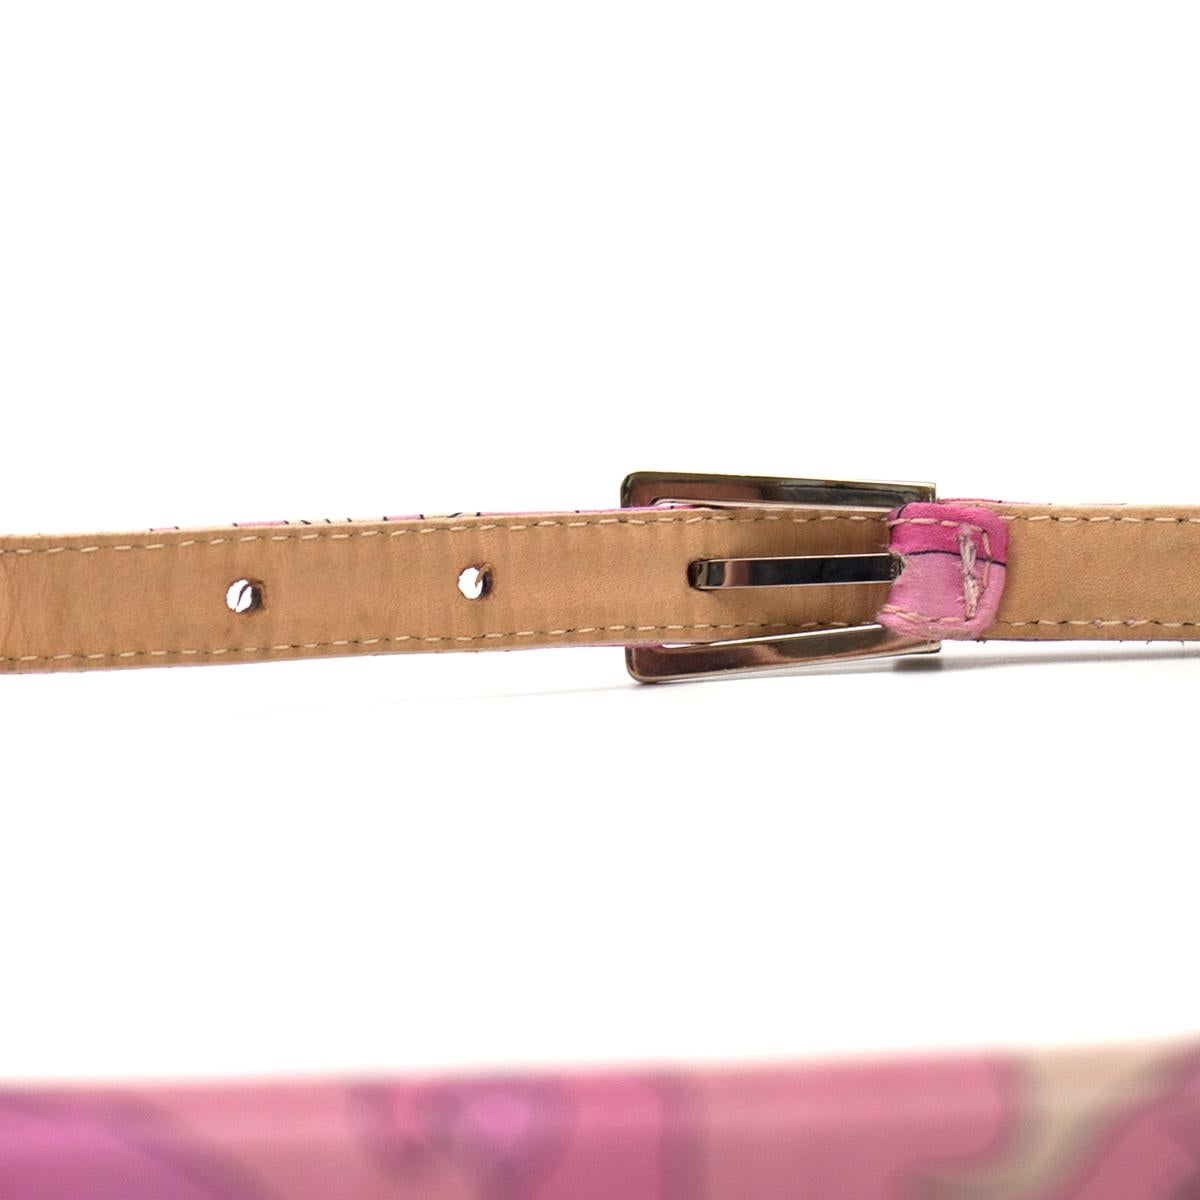 Emilio Pucci Satin Pink Belt

- Pink thin belt 
- Buckle fastening 
- White crystal embellished buckle

Please note, these items are pre-owned and may show some signs of storage, even when unworn and unused. This is reflected within the